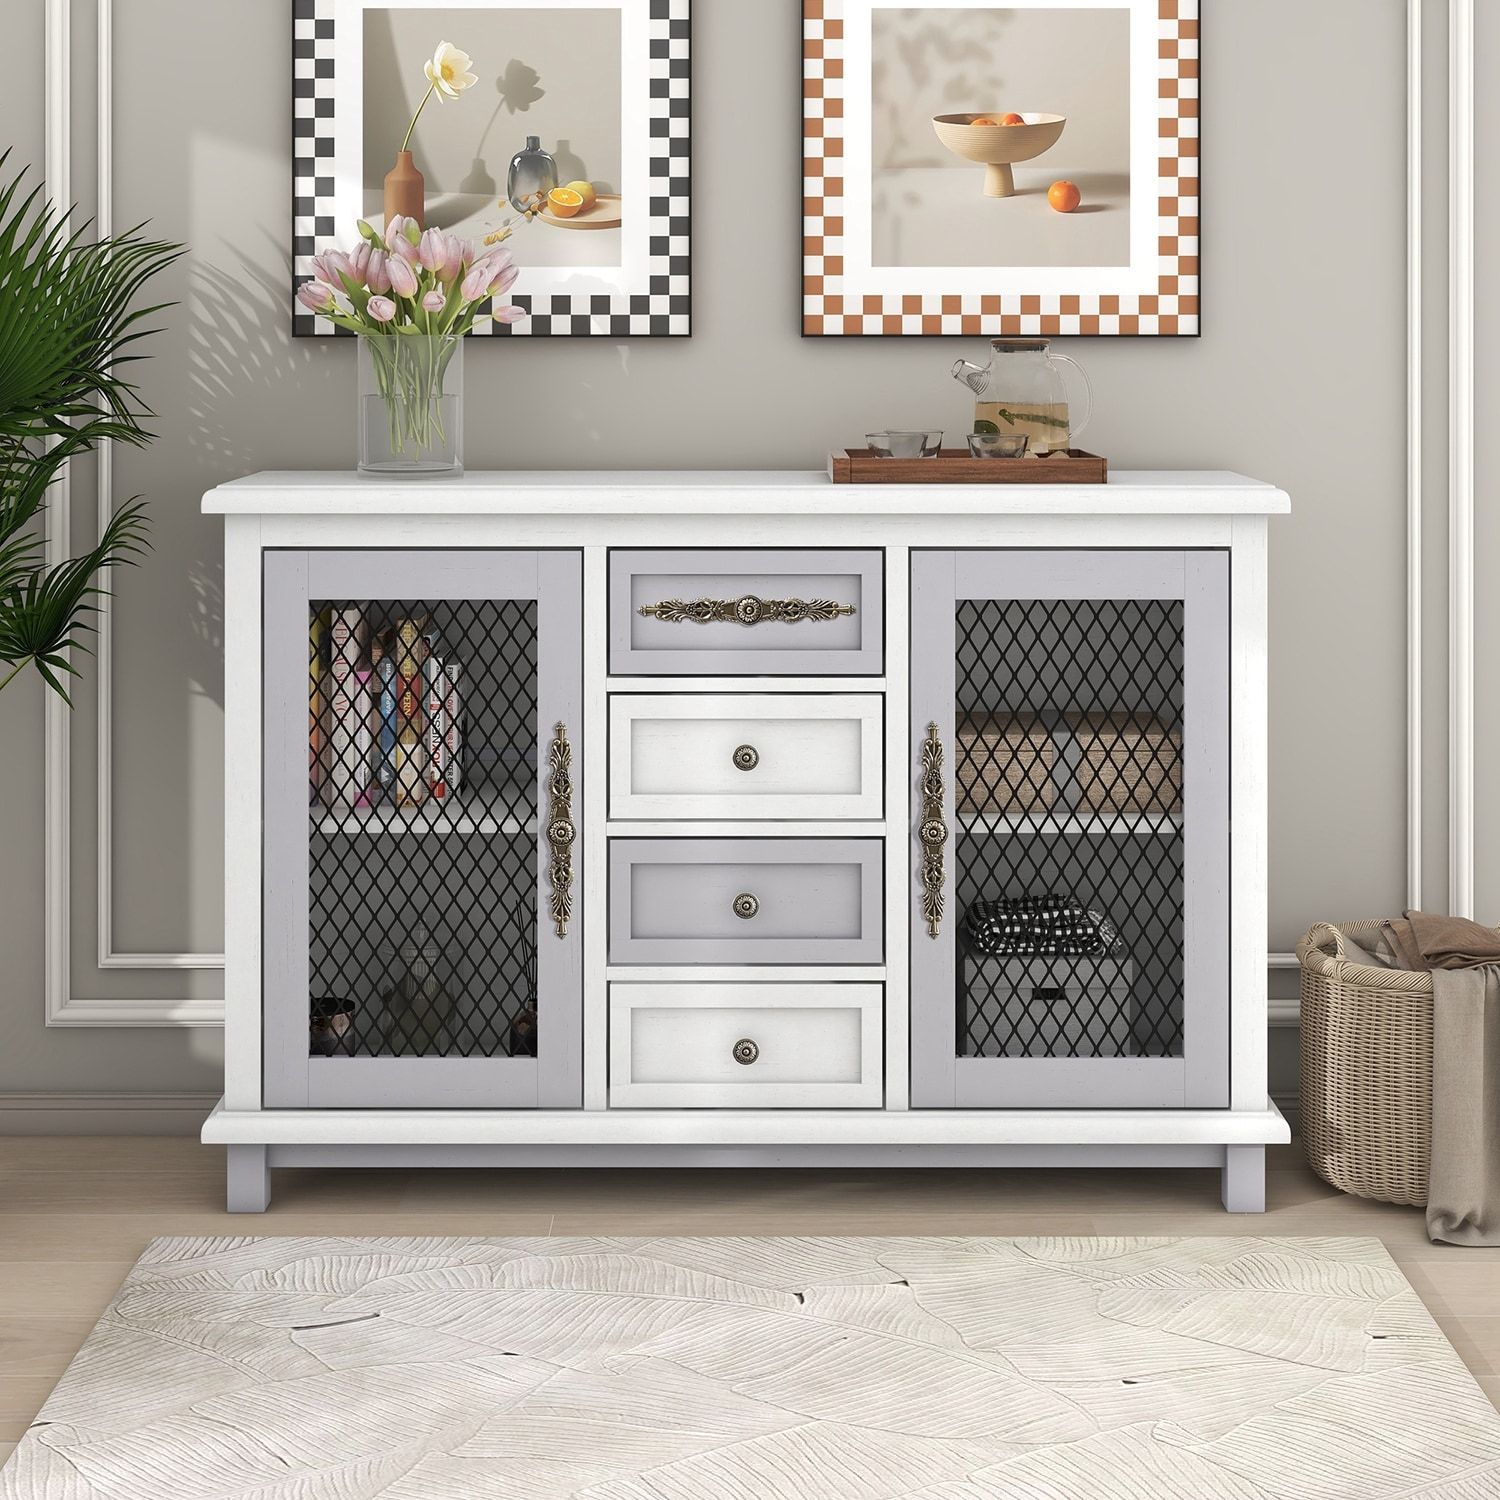 Retro Buffets Sideboard Cabinet With 4 Drawers And 2 Iron Mesh Doors – On  Sale – Bed Bath & Beyond – 37167131 Regarding Most Up To Date Sideboards With Breathable Mesh Doors (View 2 of 15)